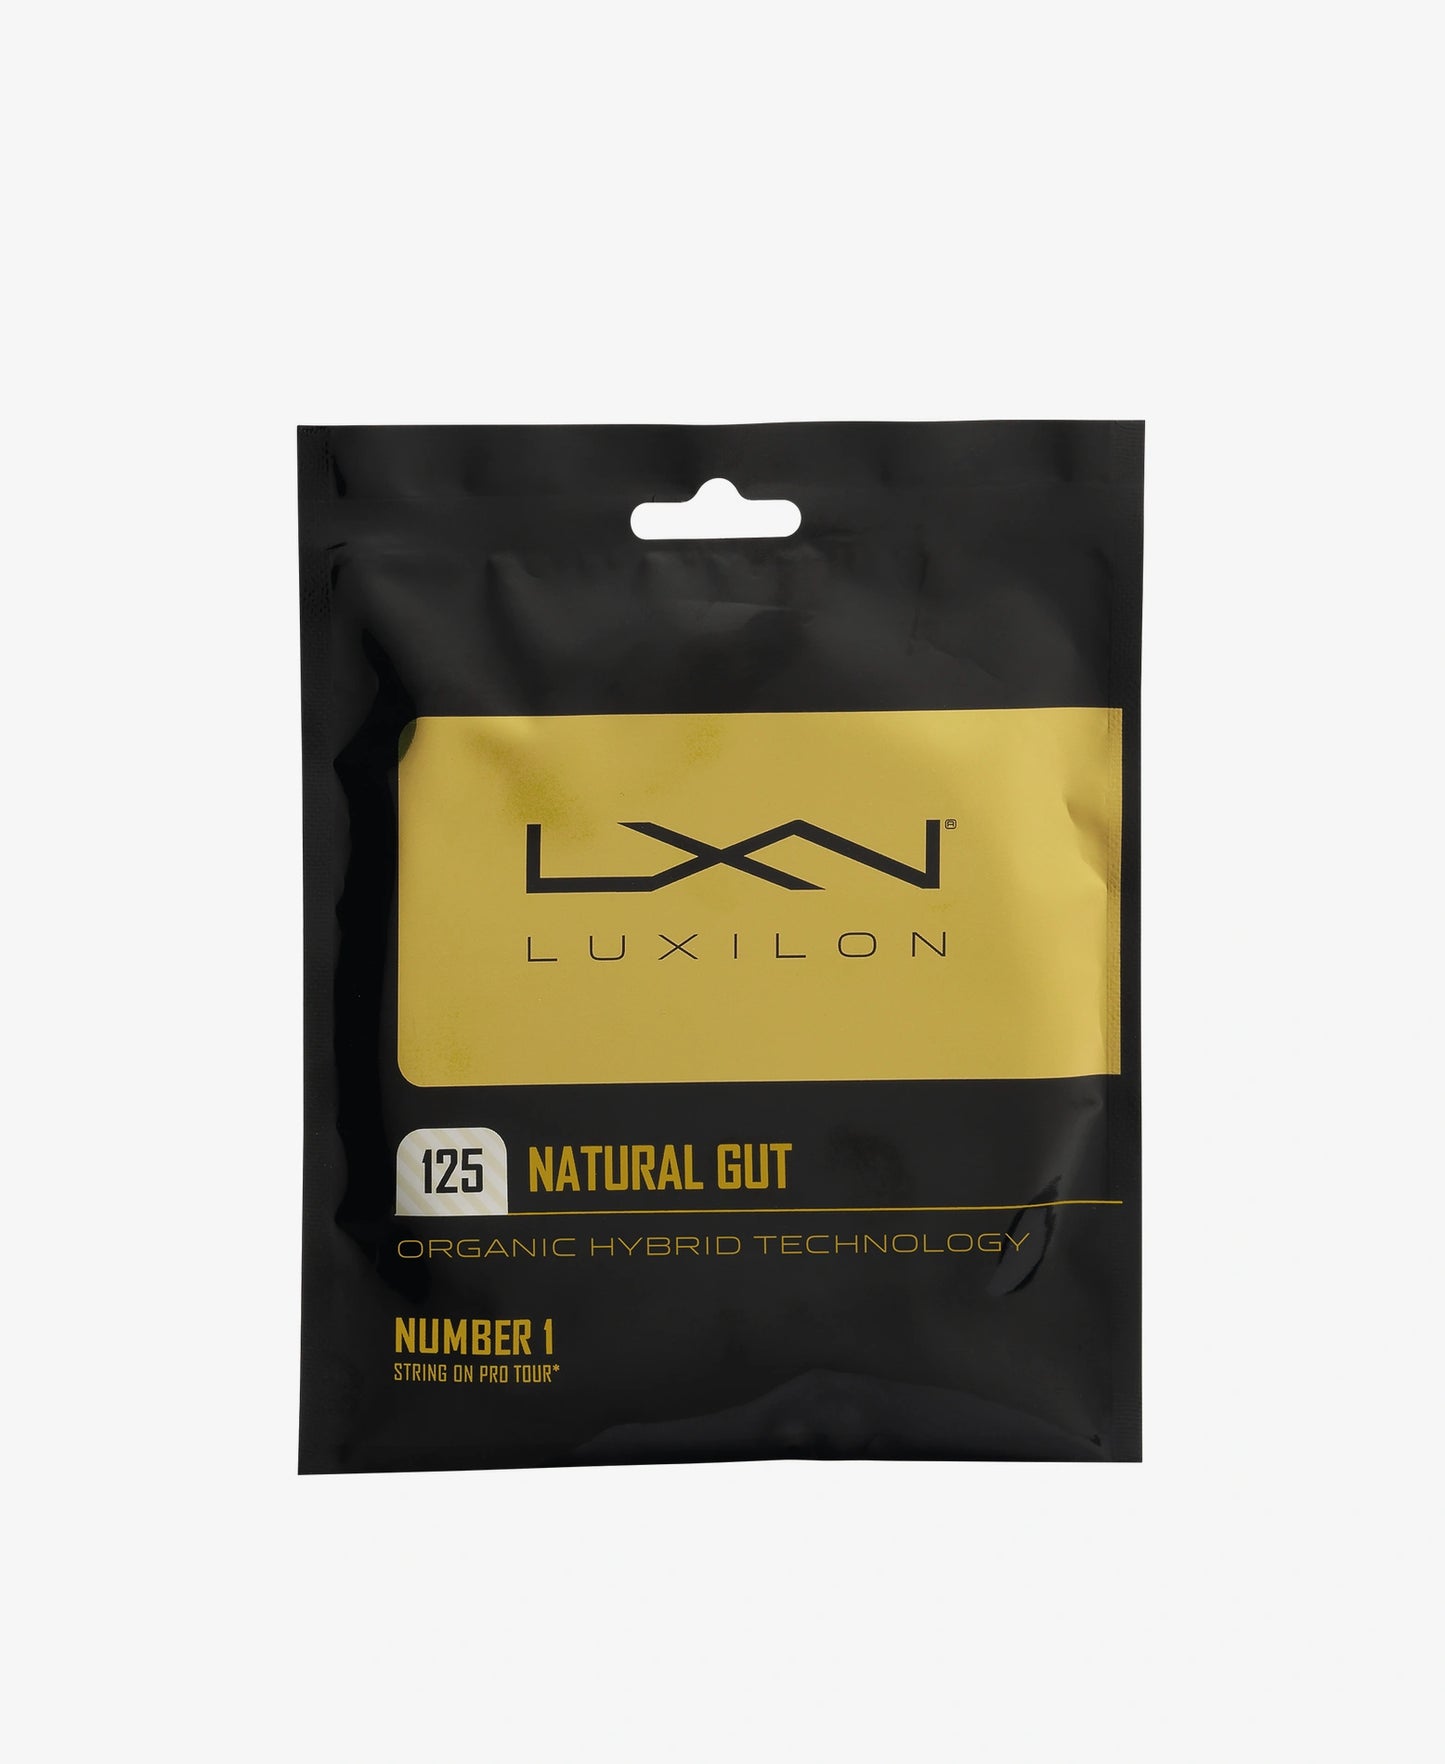 A set of Luxilon Natural Gut 125 Tennis String available for sale at GSM Sports.      